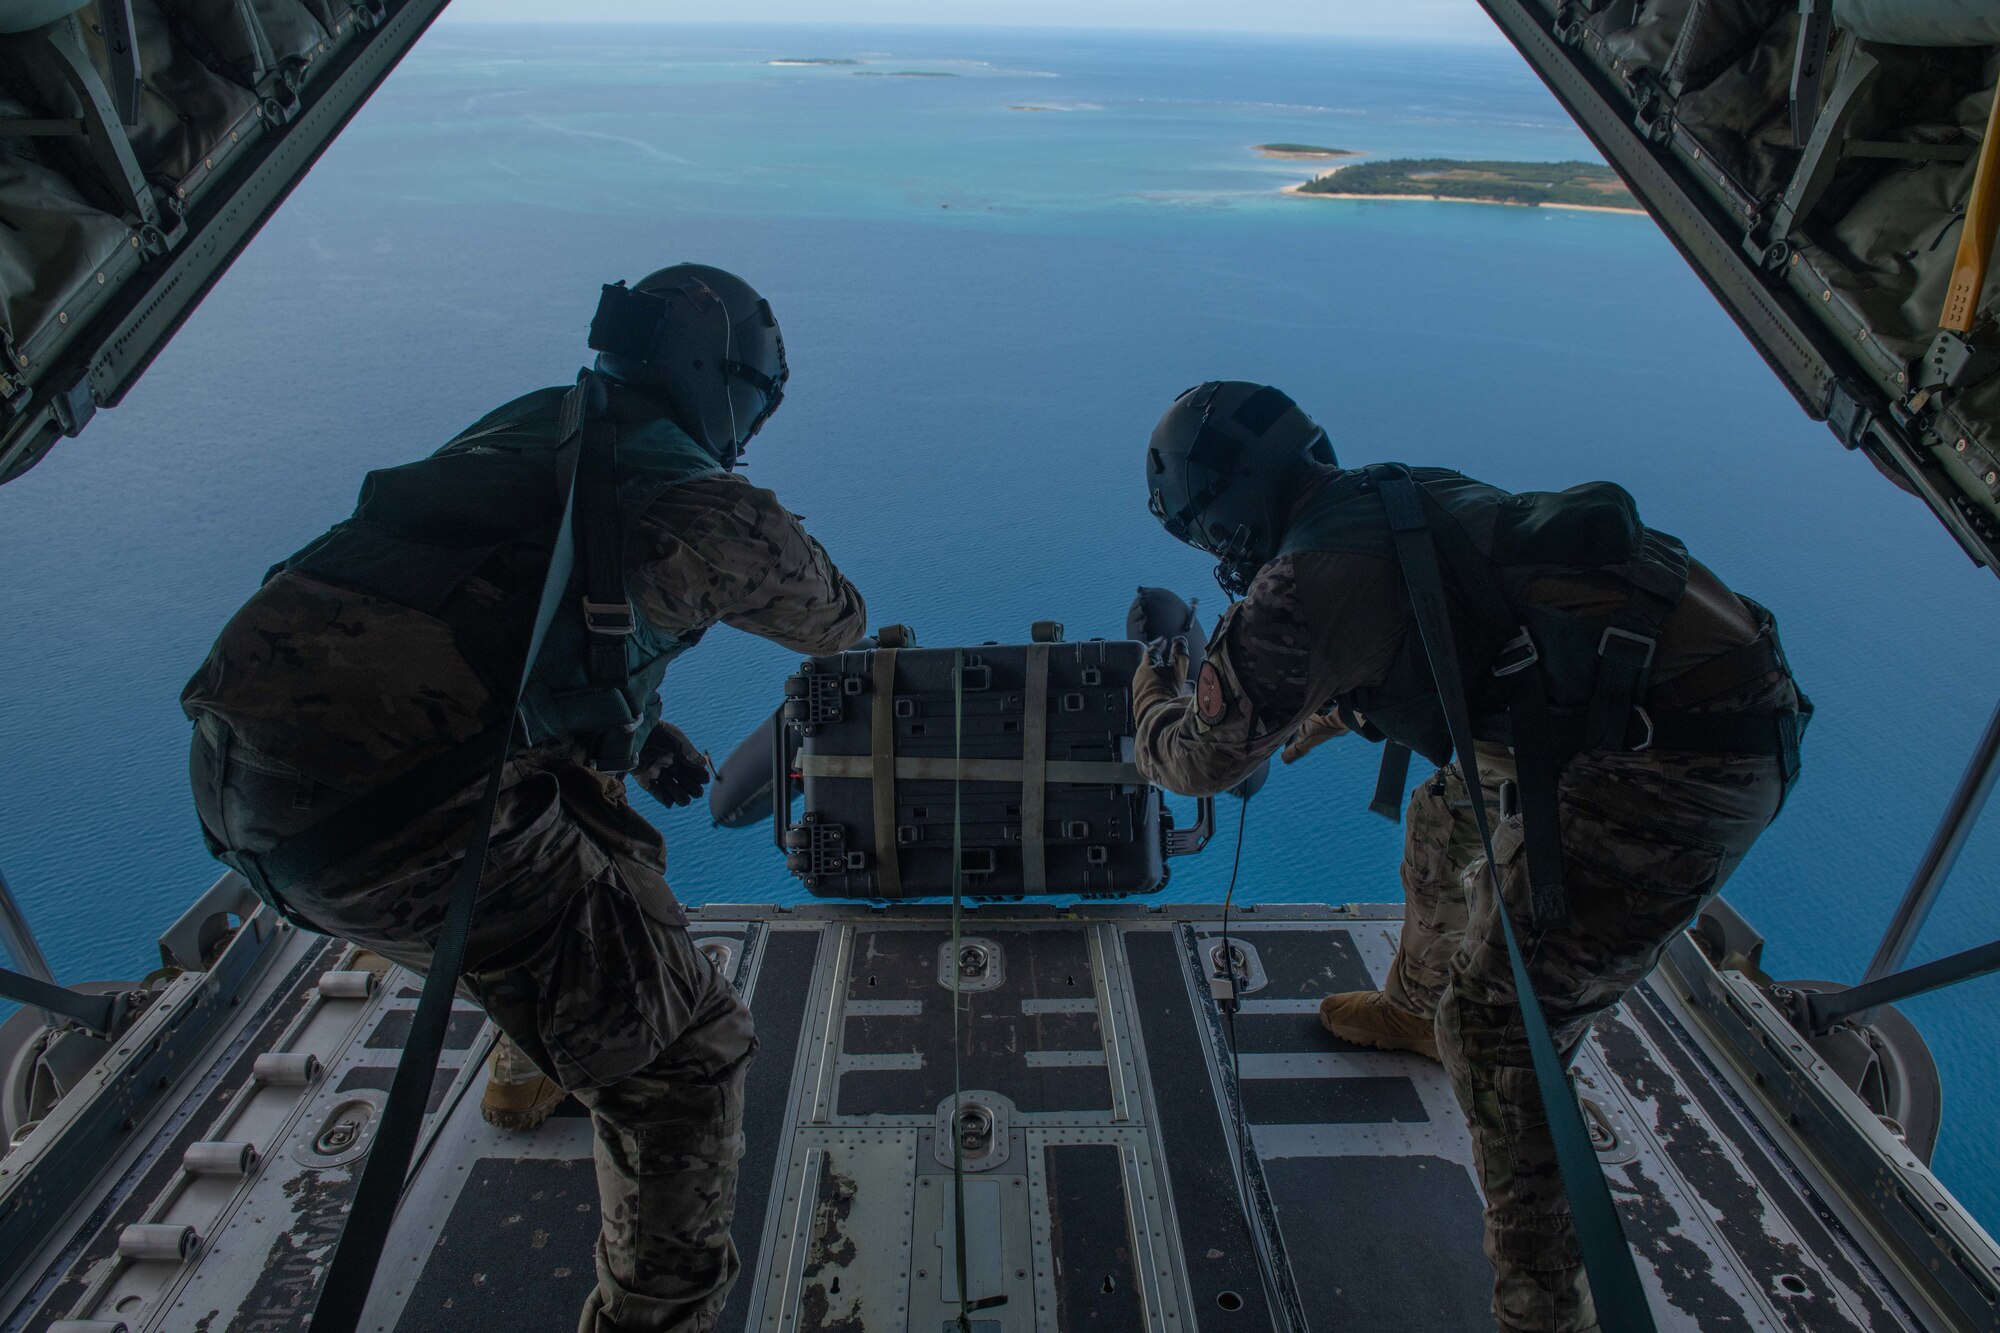 U.S. Air Force HC-130J Super Hercules loadmasters assigned to the 79th Rescue Squadron from Davis-Monthan Air Force Base drop rescue equipment off the ramp during open water rescue training off the shores of Okinawa, Japan, July 20, 2023. The squadron worked with Kadena’s 31st and 33rd RQS, conducting a realistic training scenario for crews to enhance their knowledge on rescue operations. (U.S. Air Force photo by Senior Airman Cedrique Oldaker)